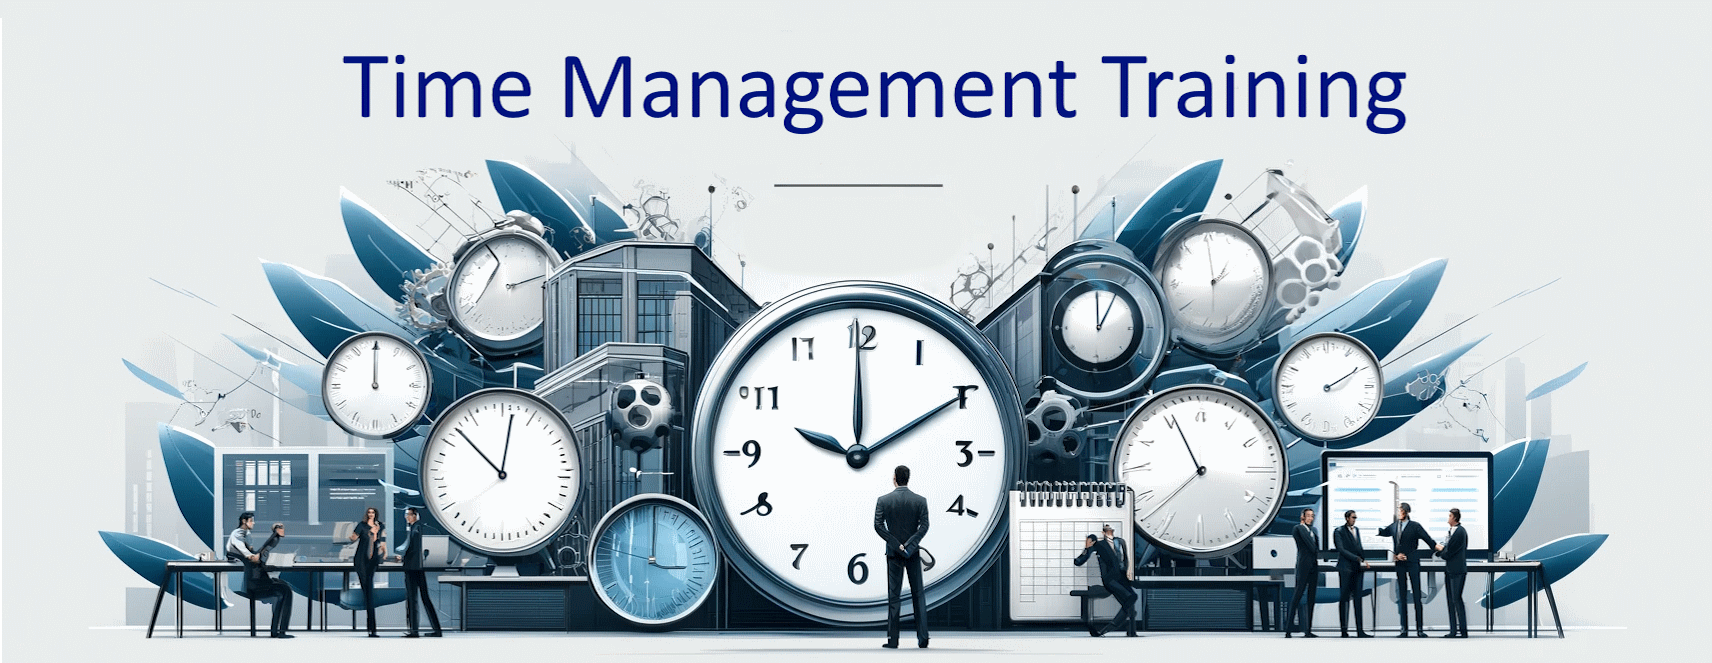 Time Management Skills Course (£395 total for this half-day course for a group of up to 15 people)